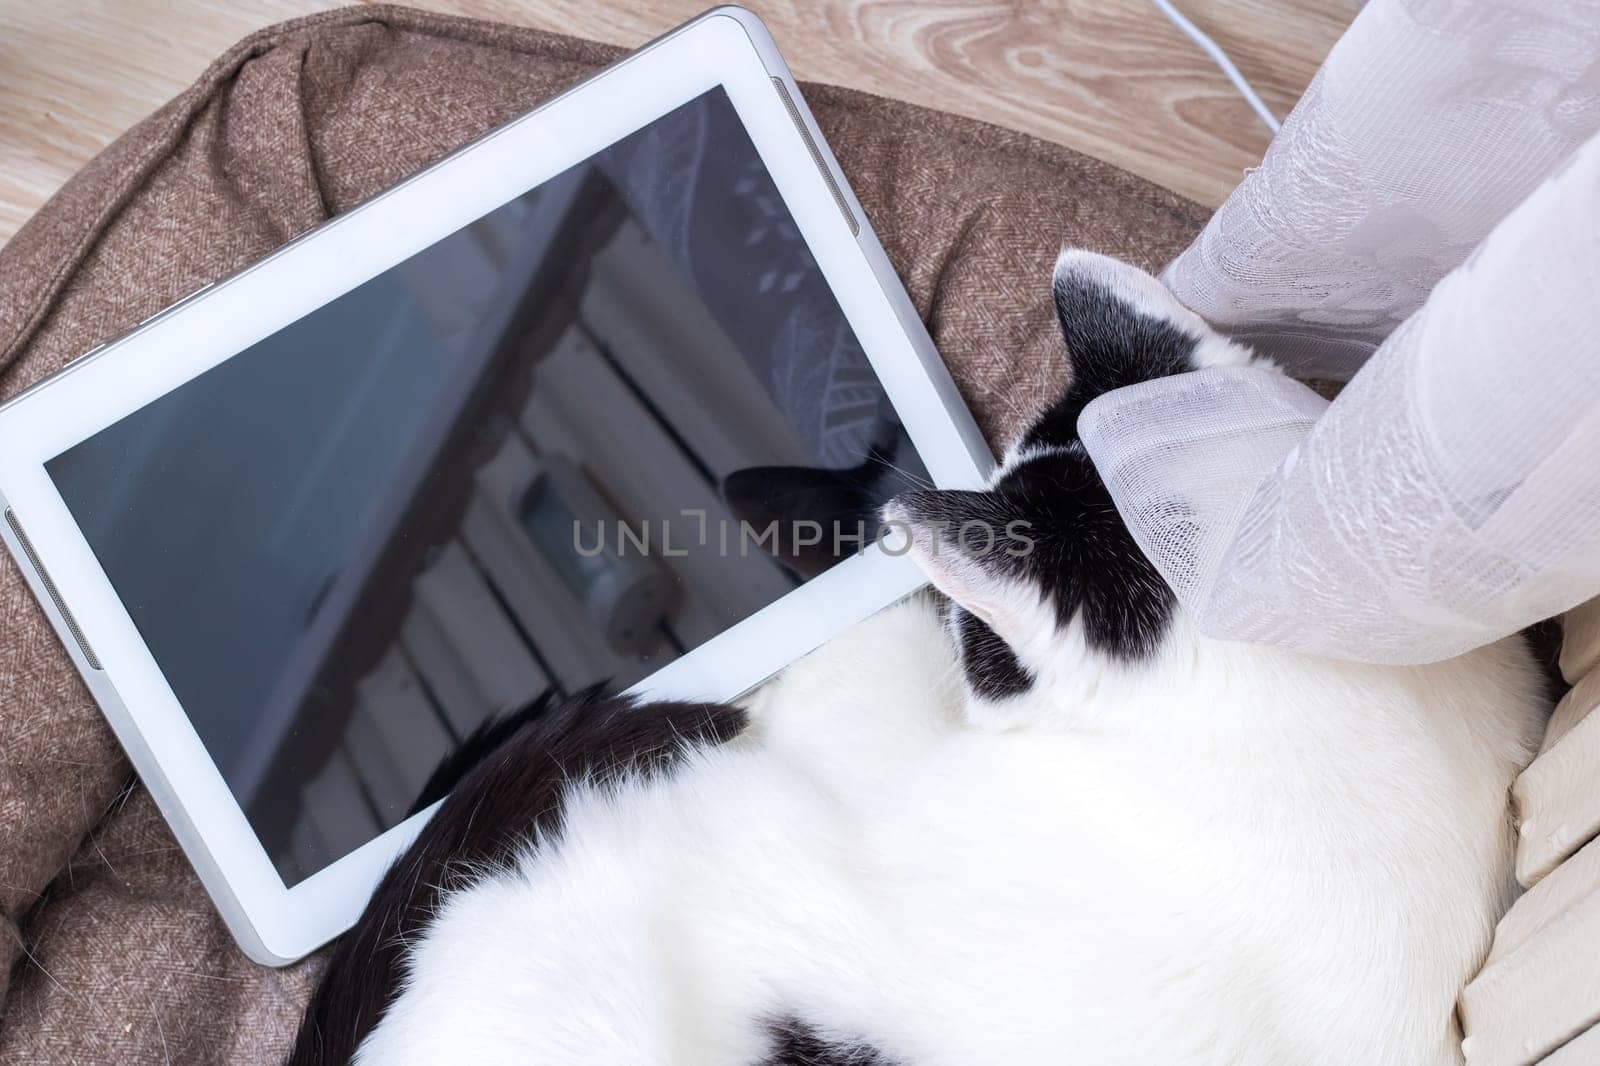 A white cat looking at a tablet screen close up